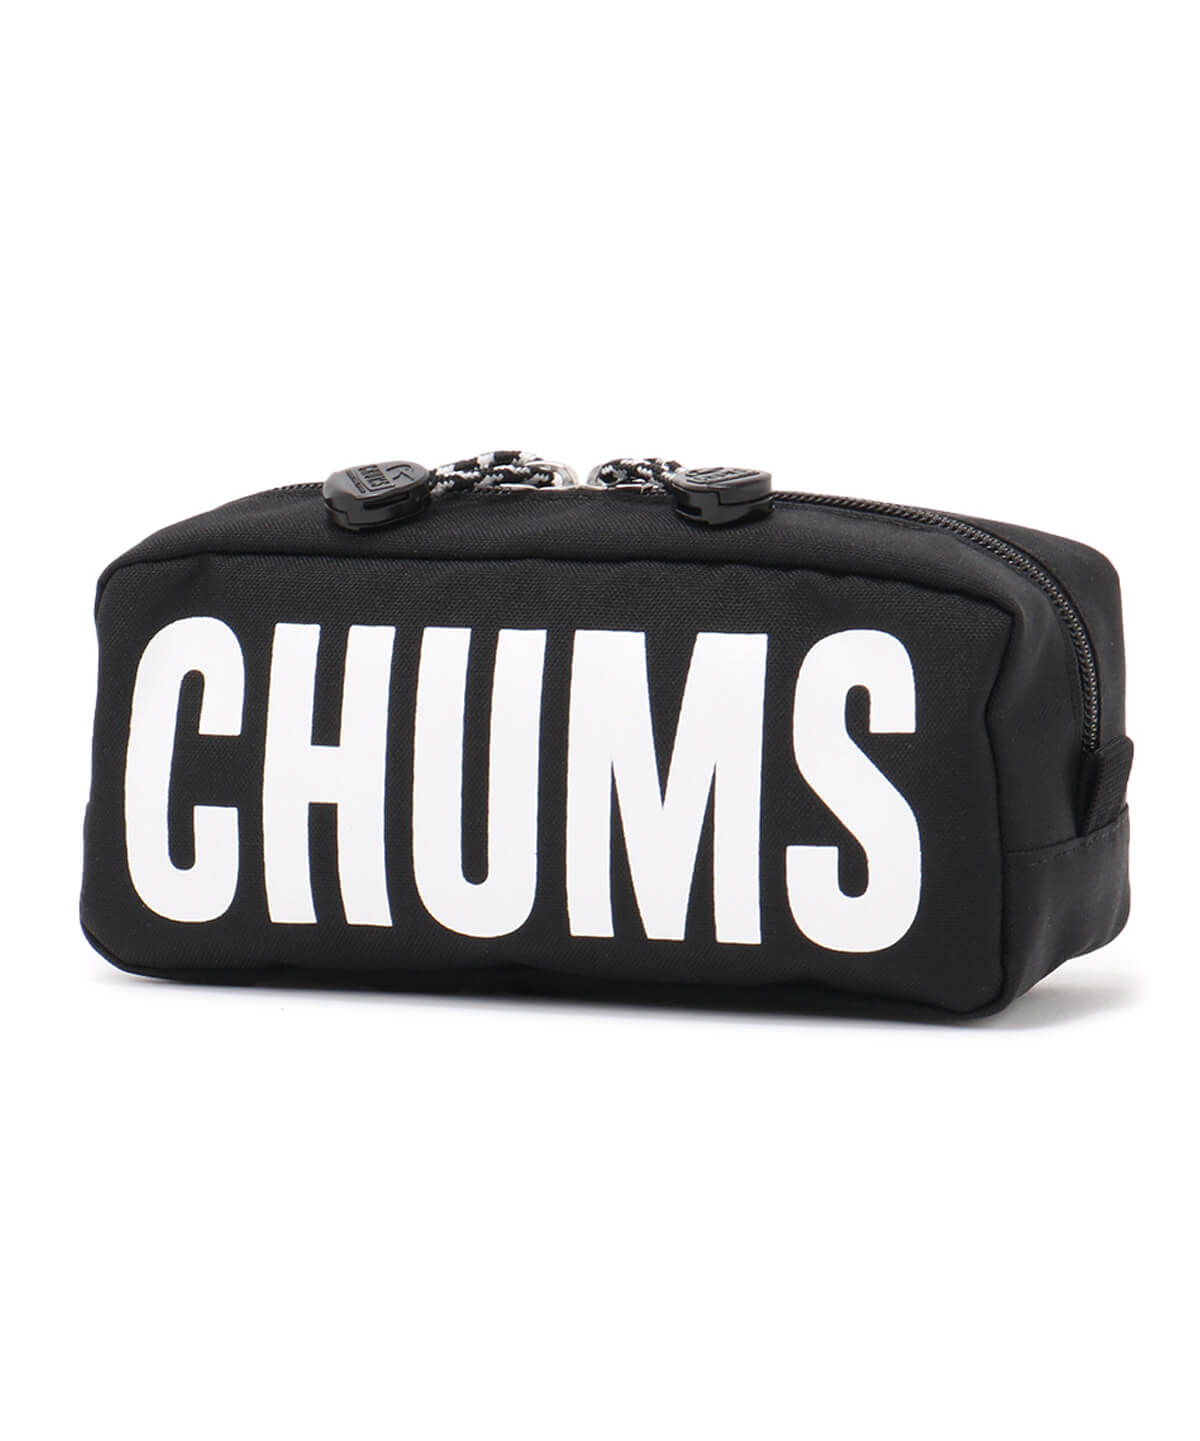 Recycle CHUMS Logo Pouch(リサイクルチャムスロゴポーチ(ポーチ｜ケース))